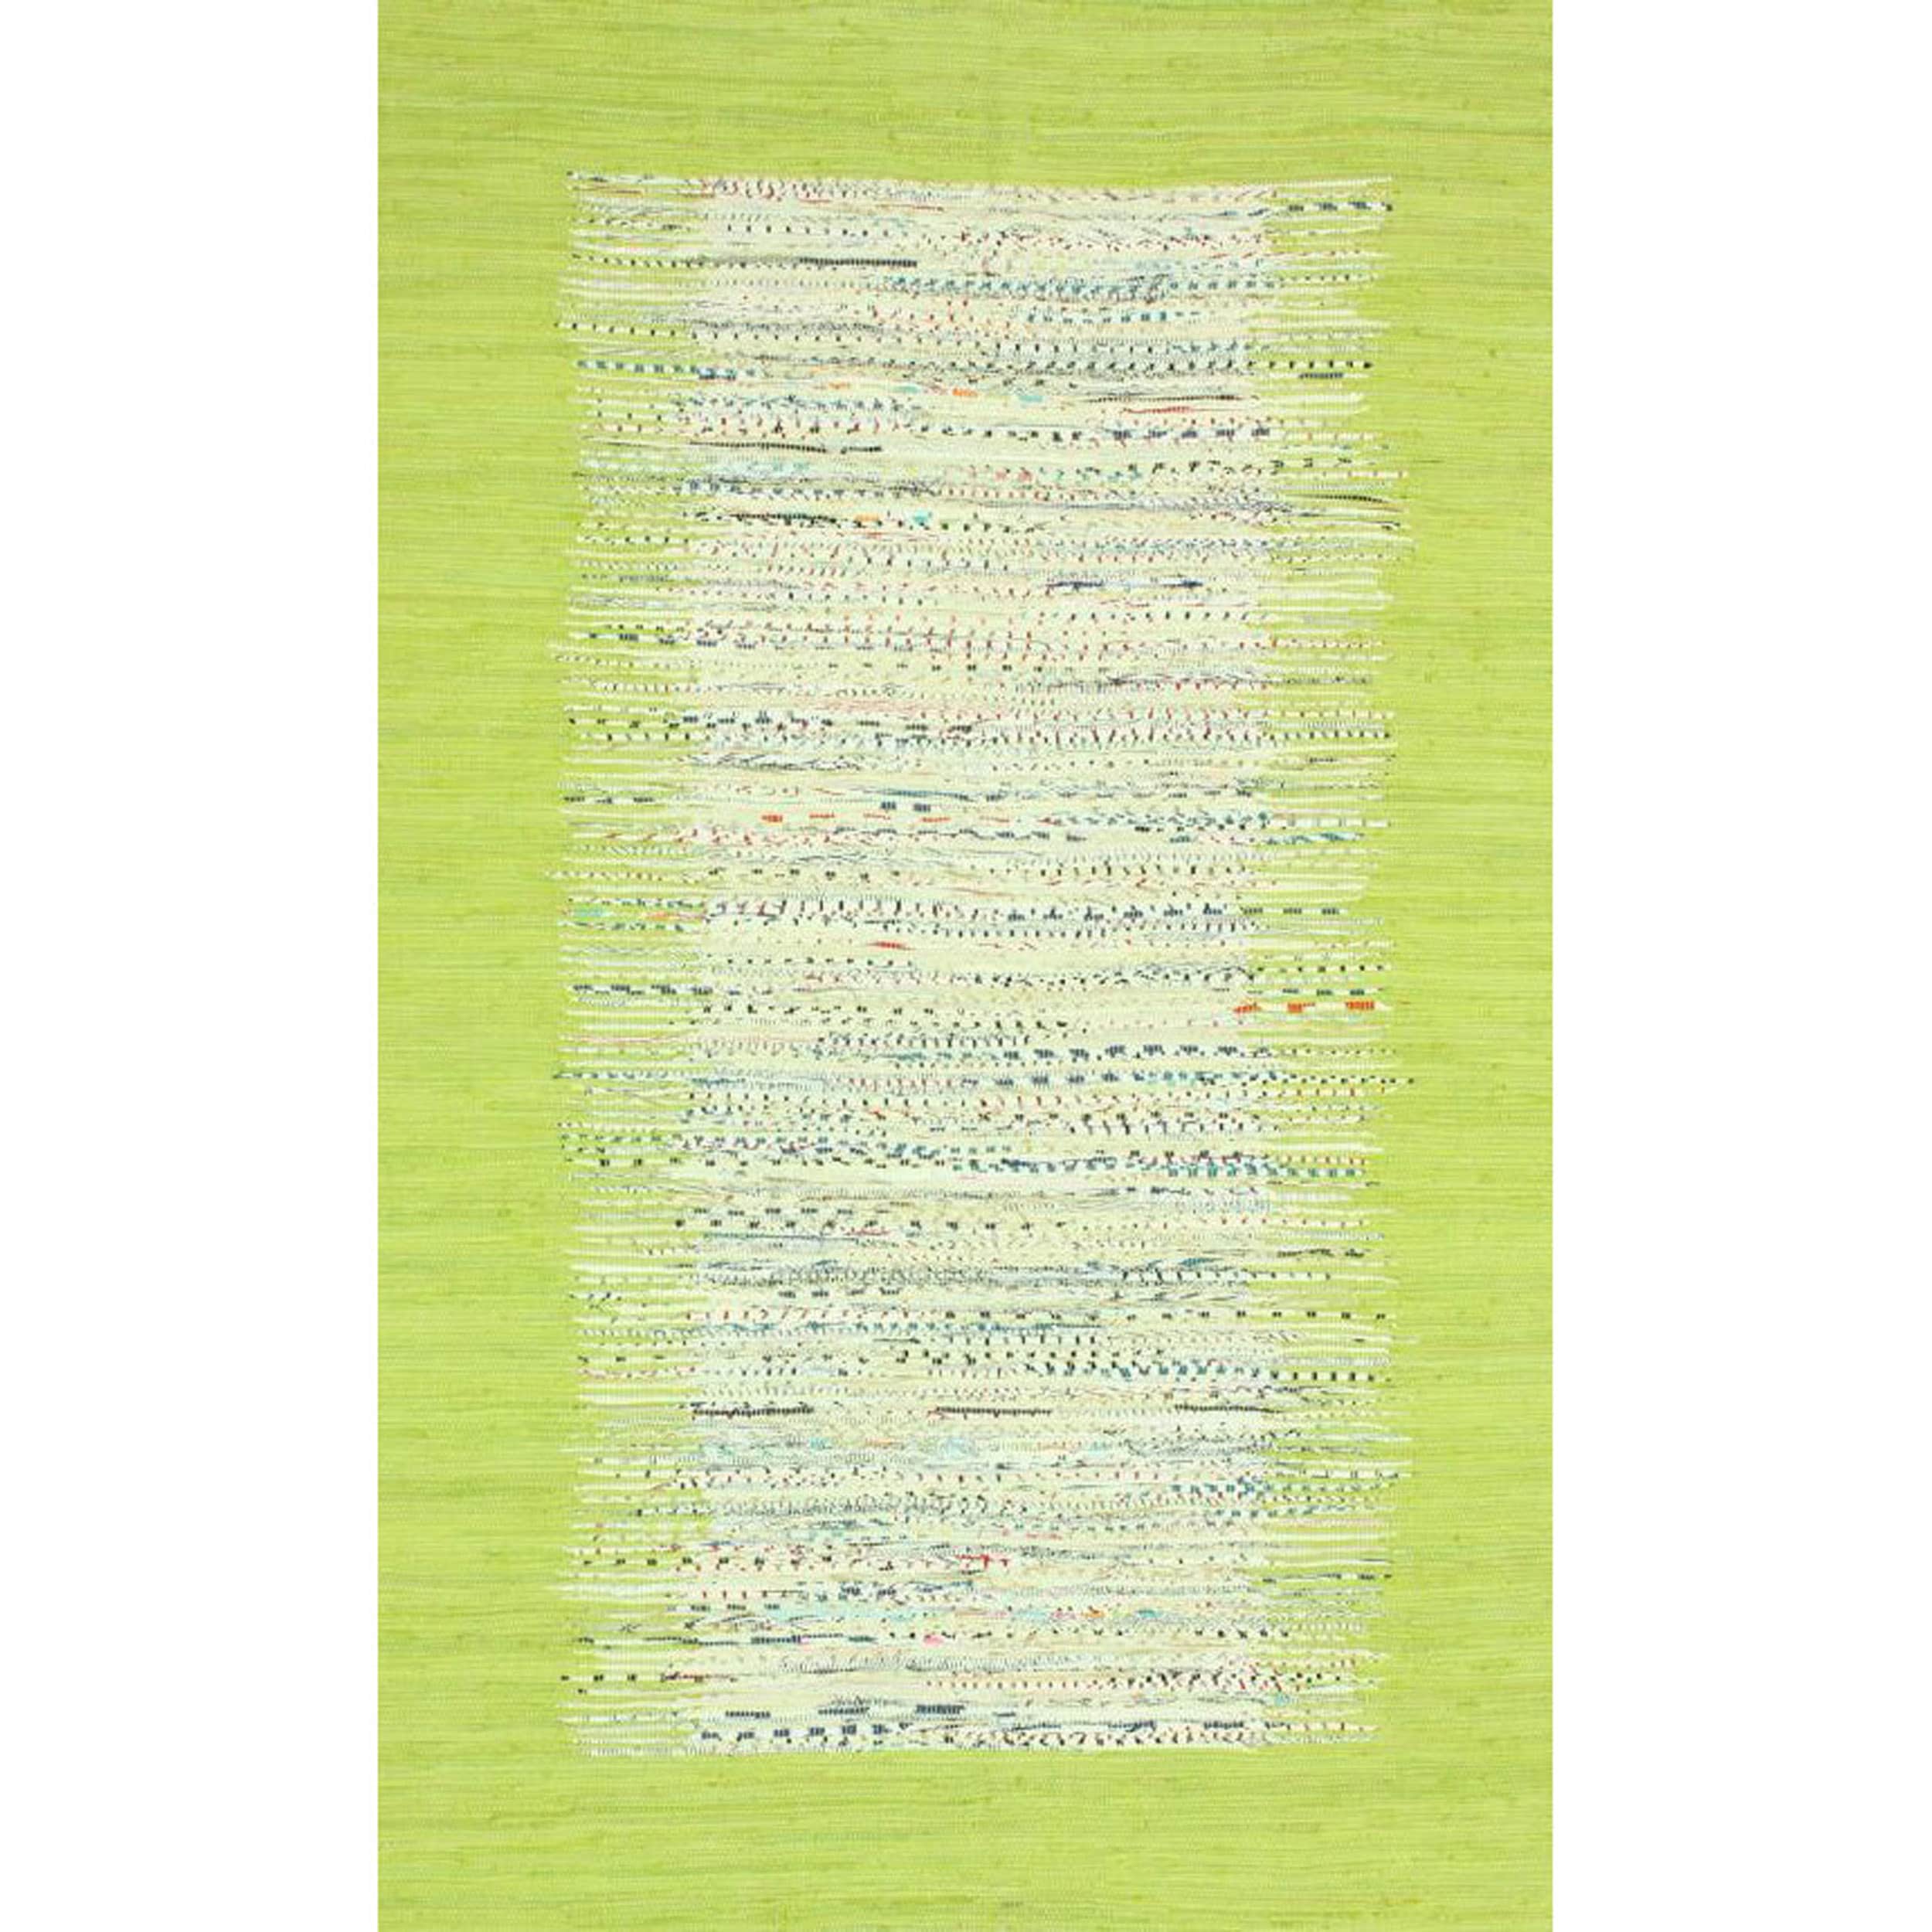 Nuloom Handmade Abstract Border Flatweave Cotton Rug (6 X 9) (IvoryPattern AbstractTip We recommend the use of a non skid pad to keep the rug in place on smooth surfaces.All rug sizes are approximate. Due to the difference of monitor colors, some rug co